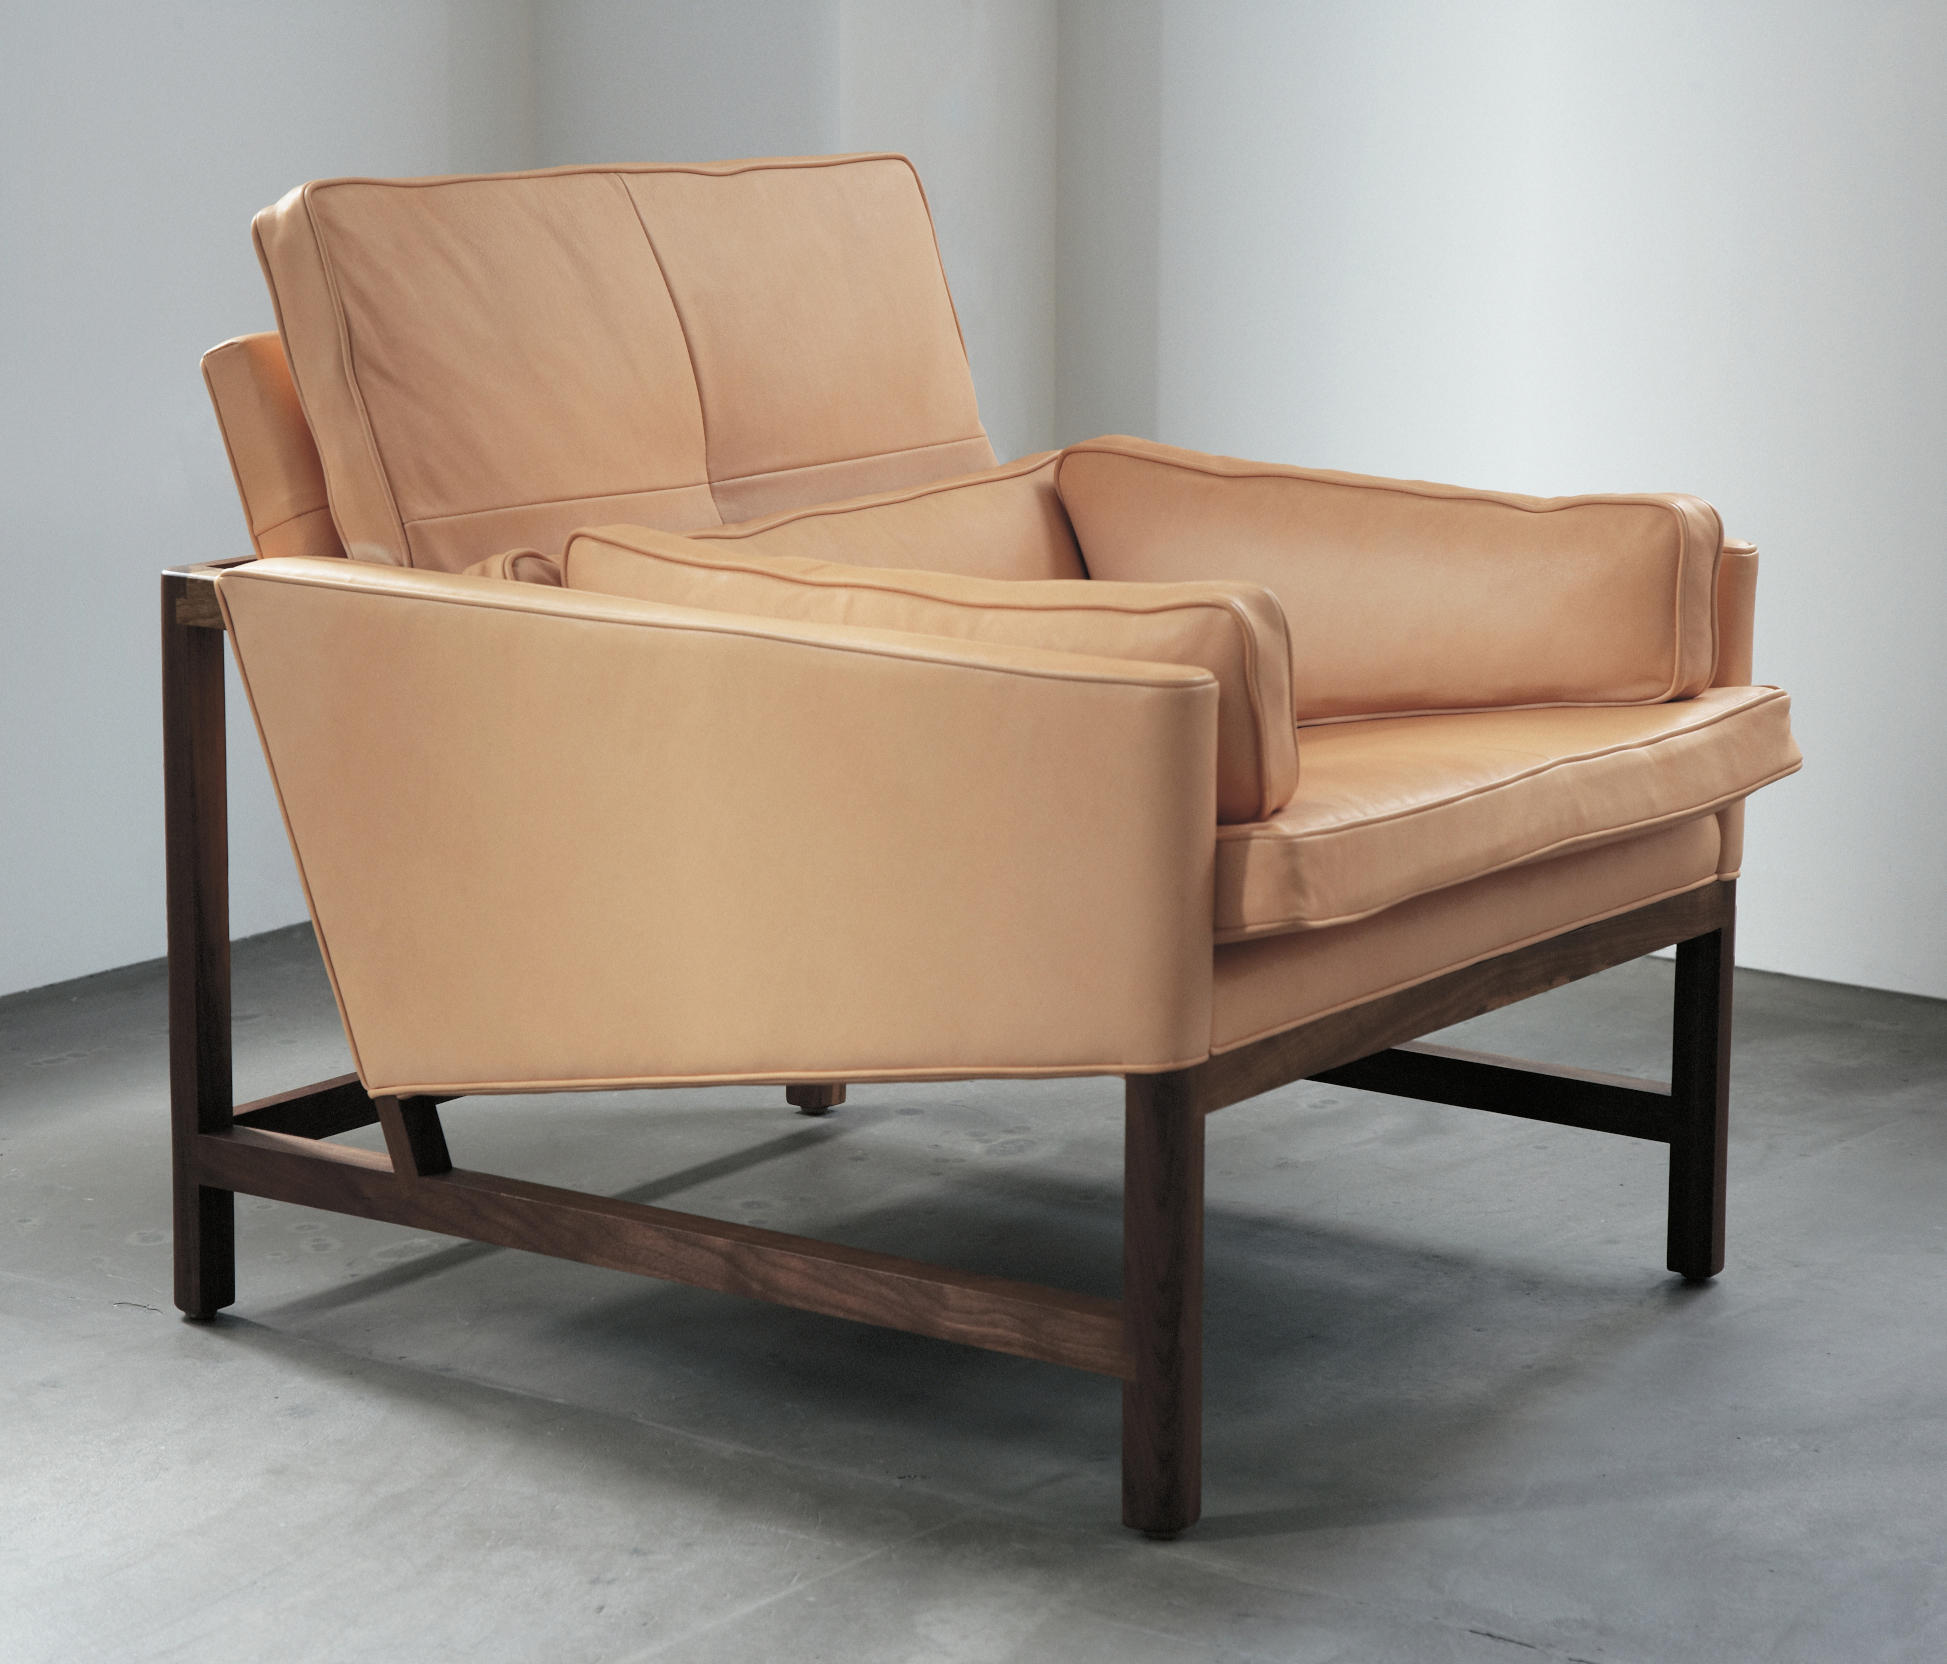 LOW BACK LOUNGE CHAIR Armchairs From BassamFellows Architonic